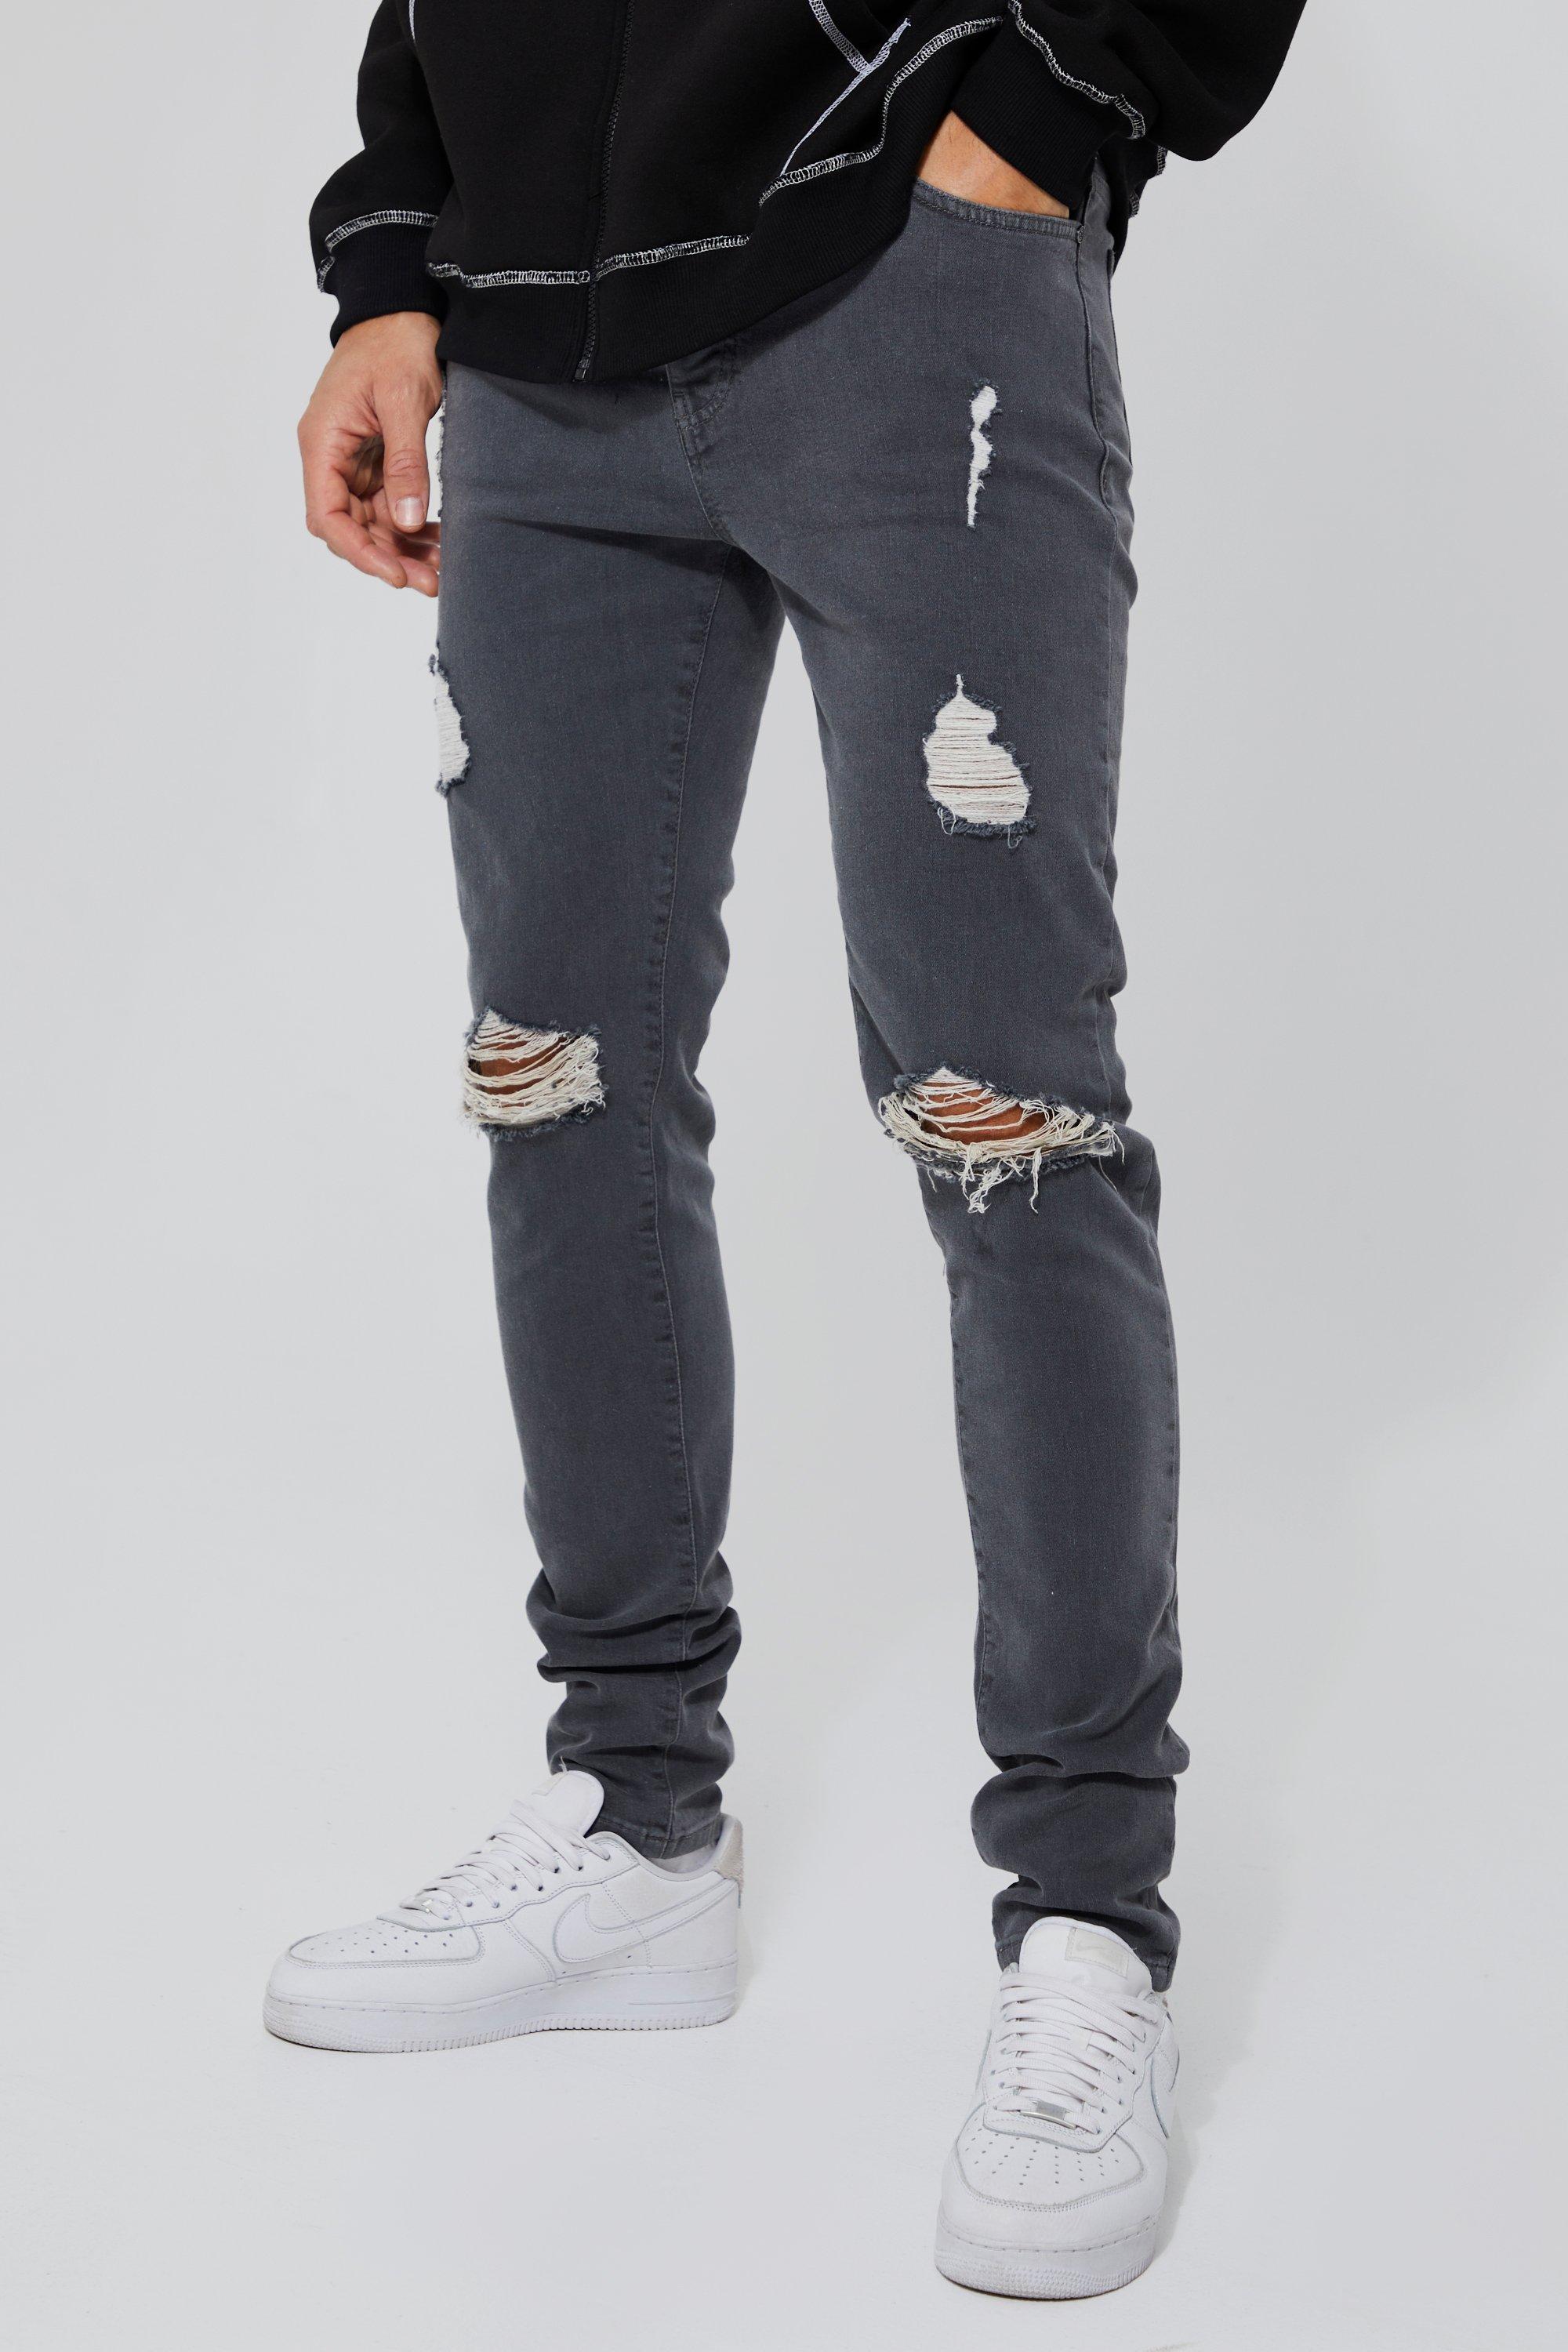 Tall Skinny Stretch Exploded Knee Ripped Jeans